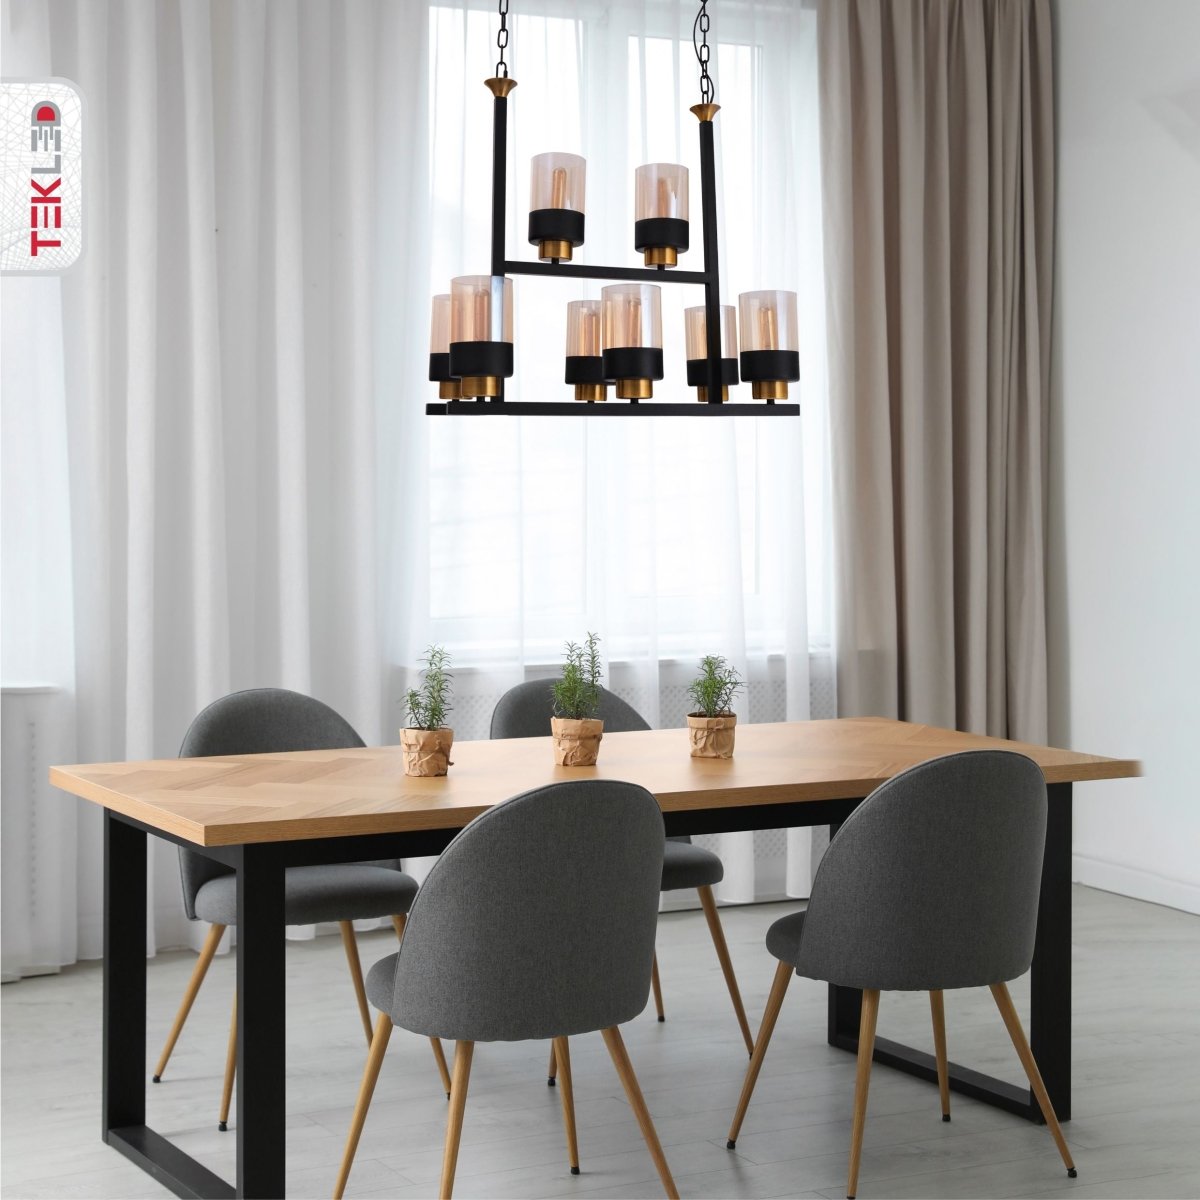 More interior usage of Amber Cylinder Glass Black Metal Chandelier with 8xE27 Fitting | TEKLED 158-19586